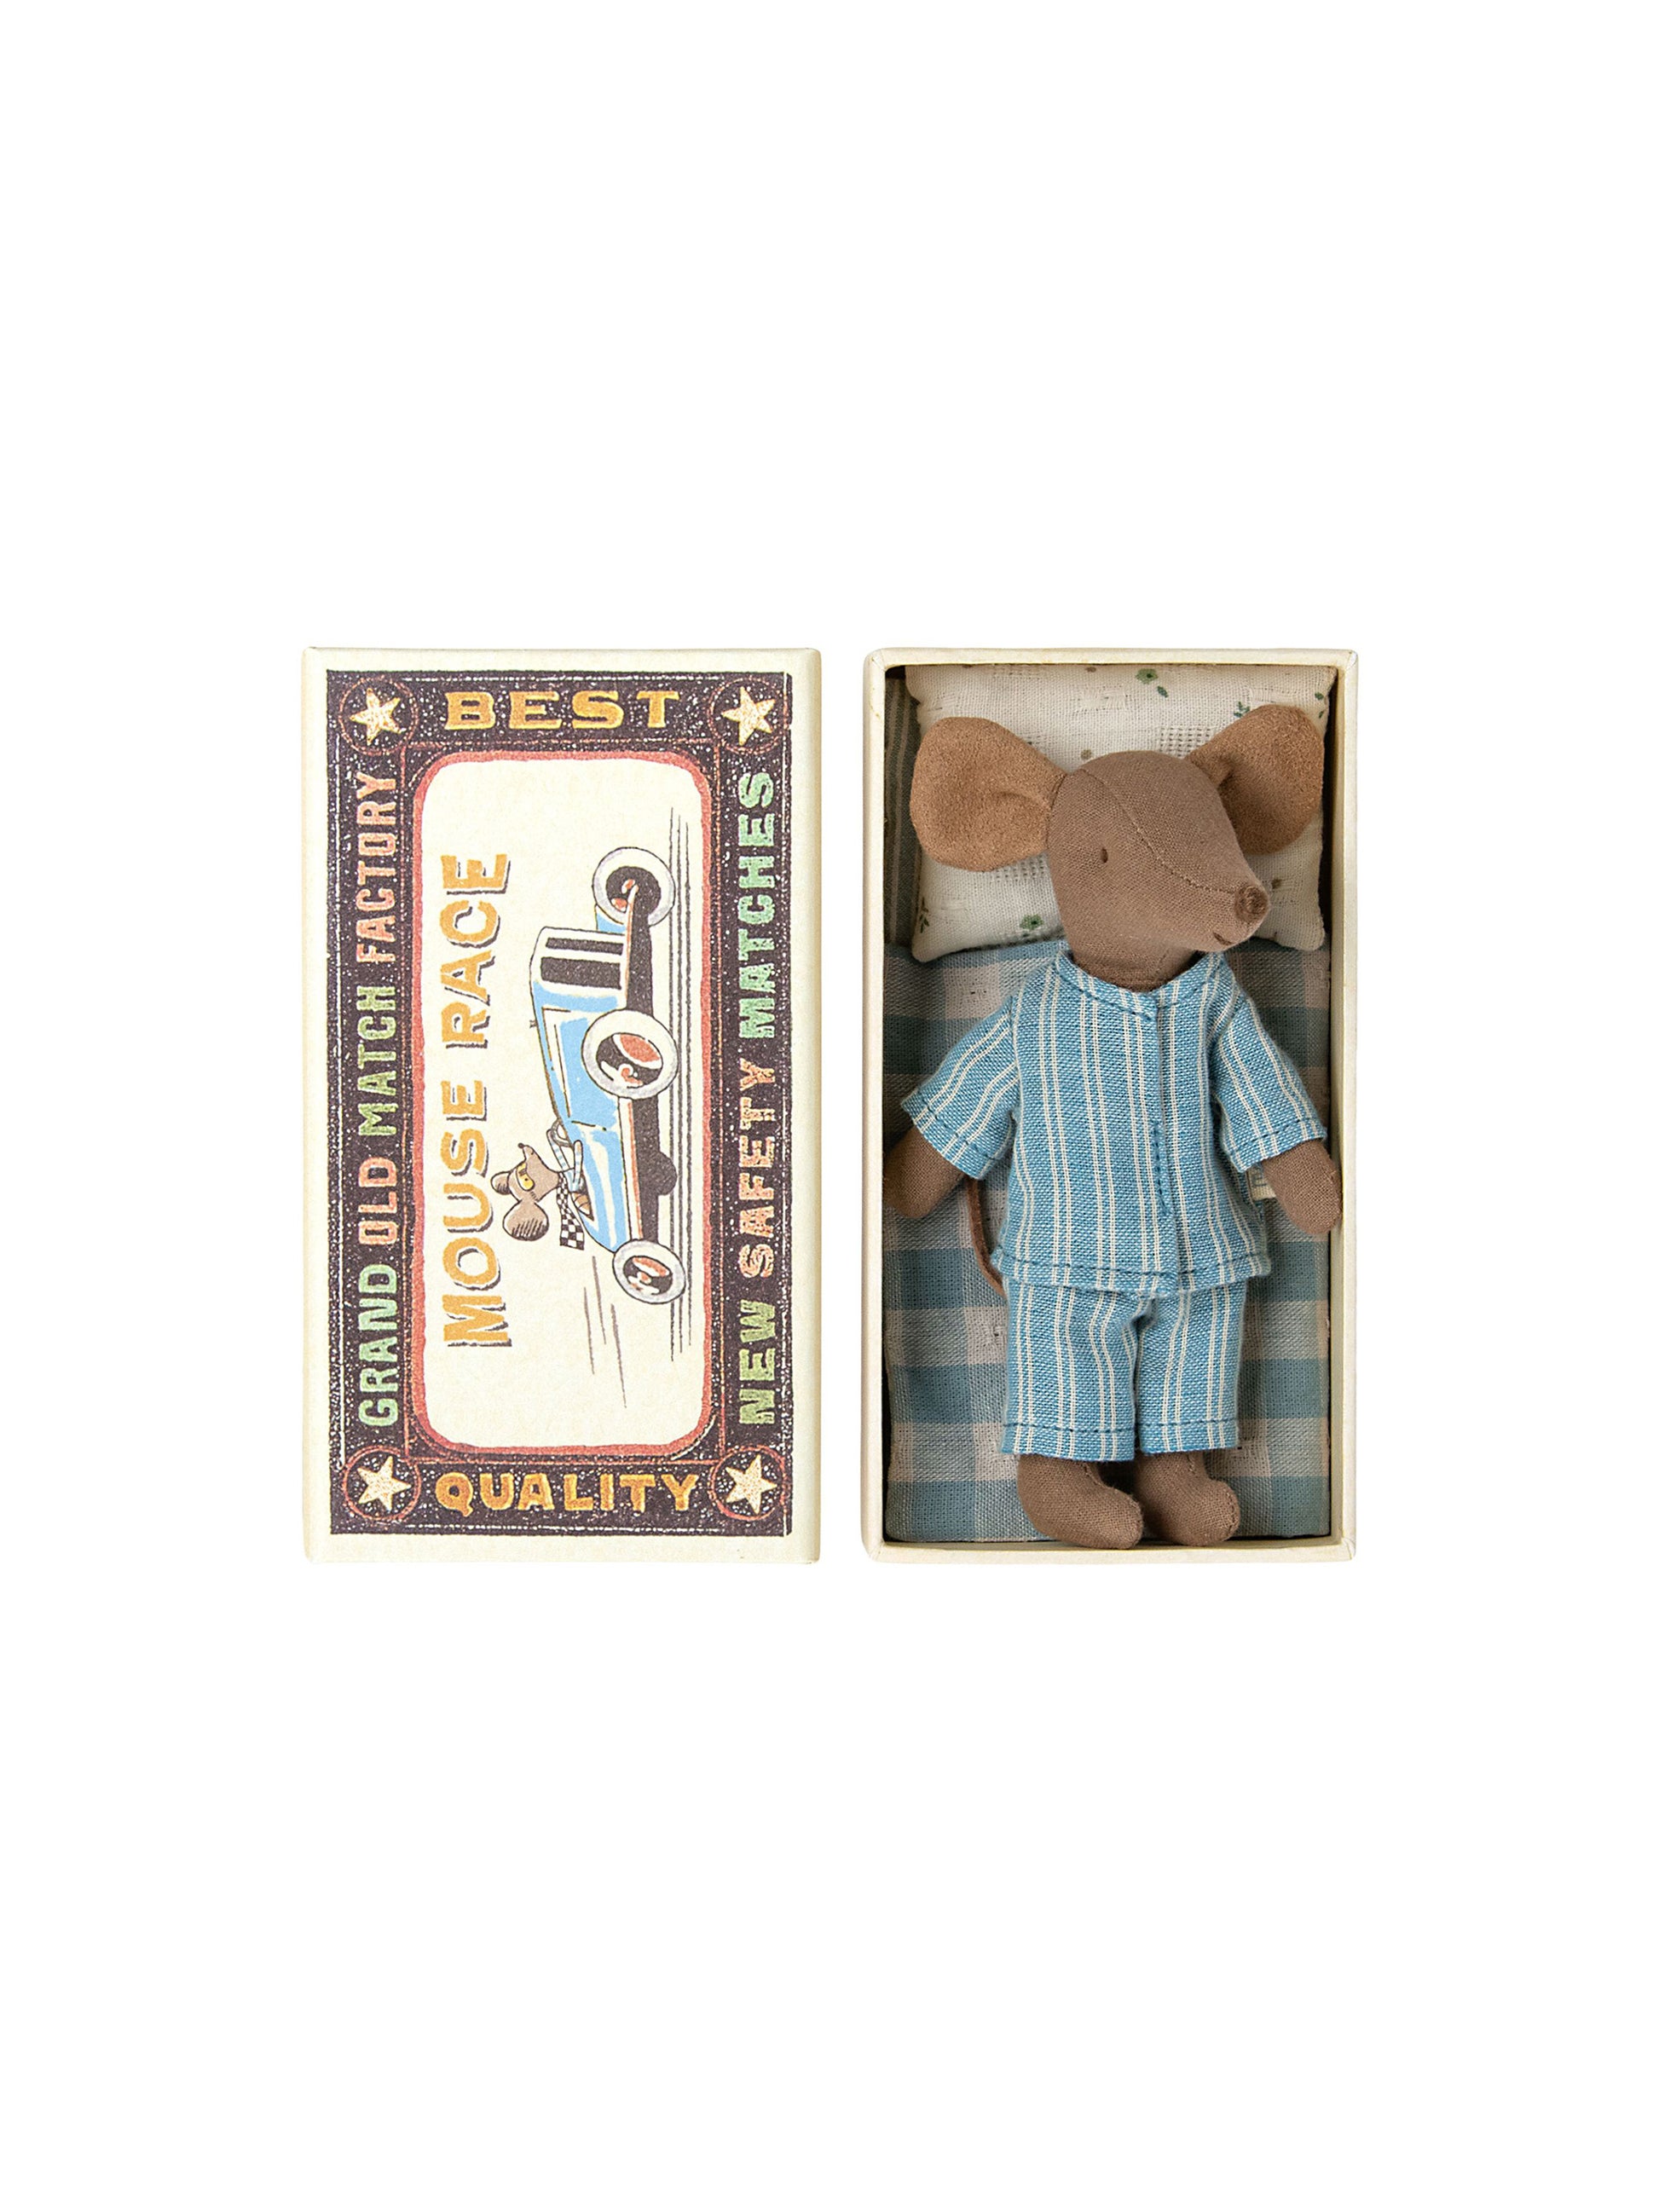 Maileg Big Brother Pajama Mouse in Matchbox Weston Table